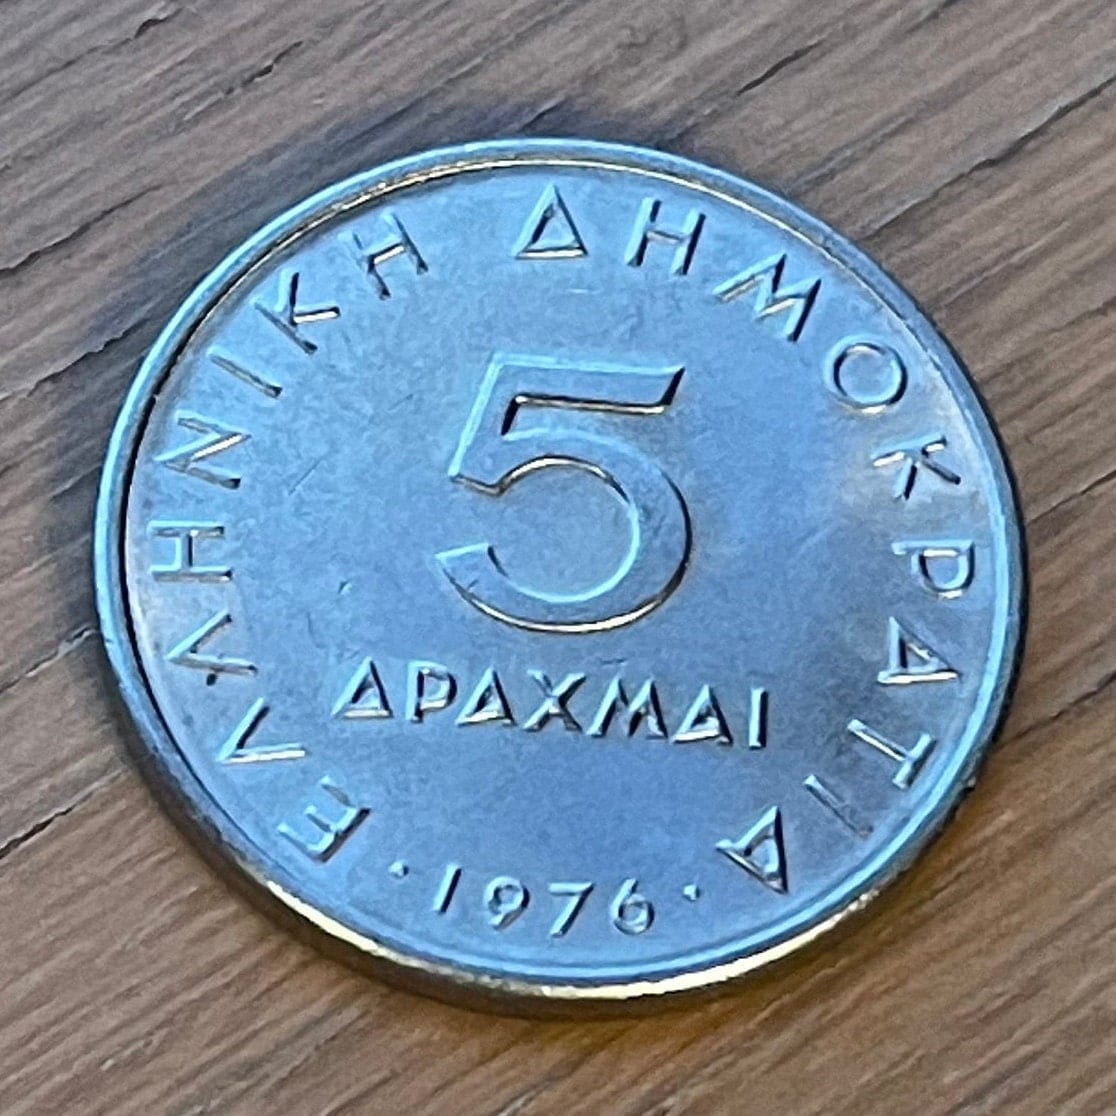 Aristotle 5 Drachmai Greece Authentic Coin Money for Jewelry and Craft Making